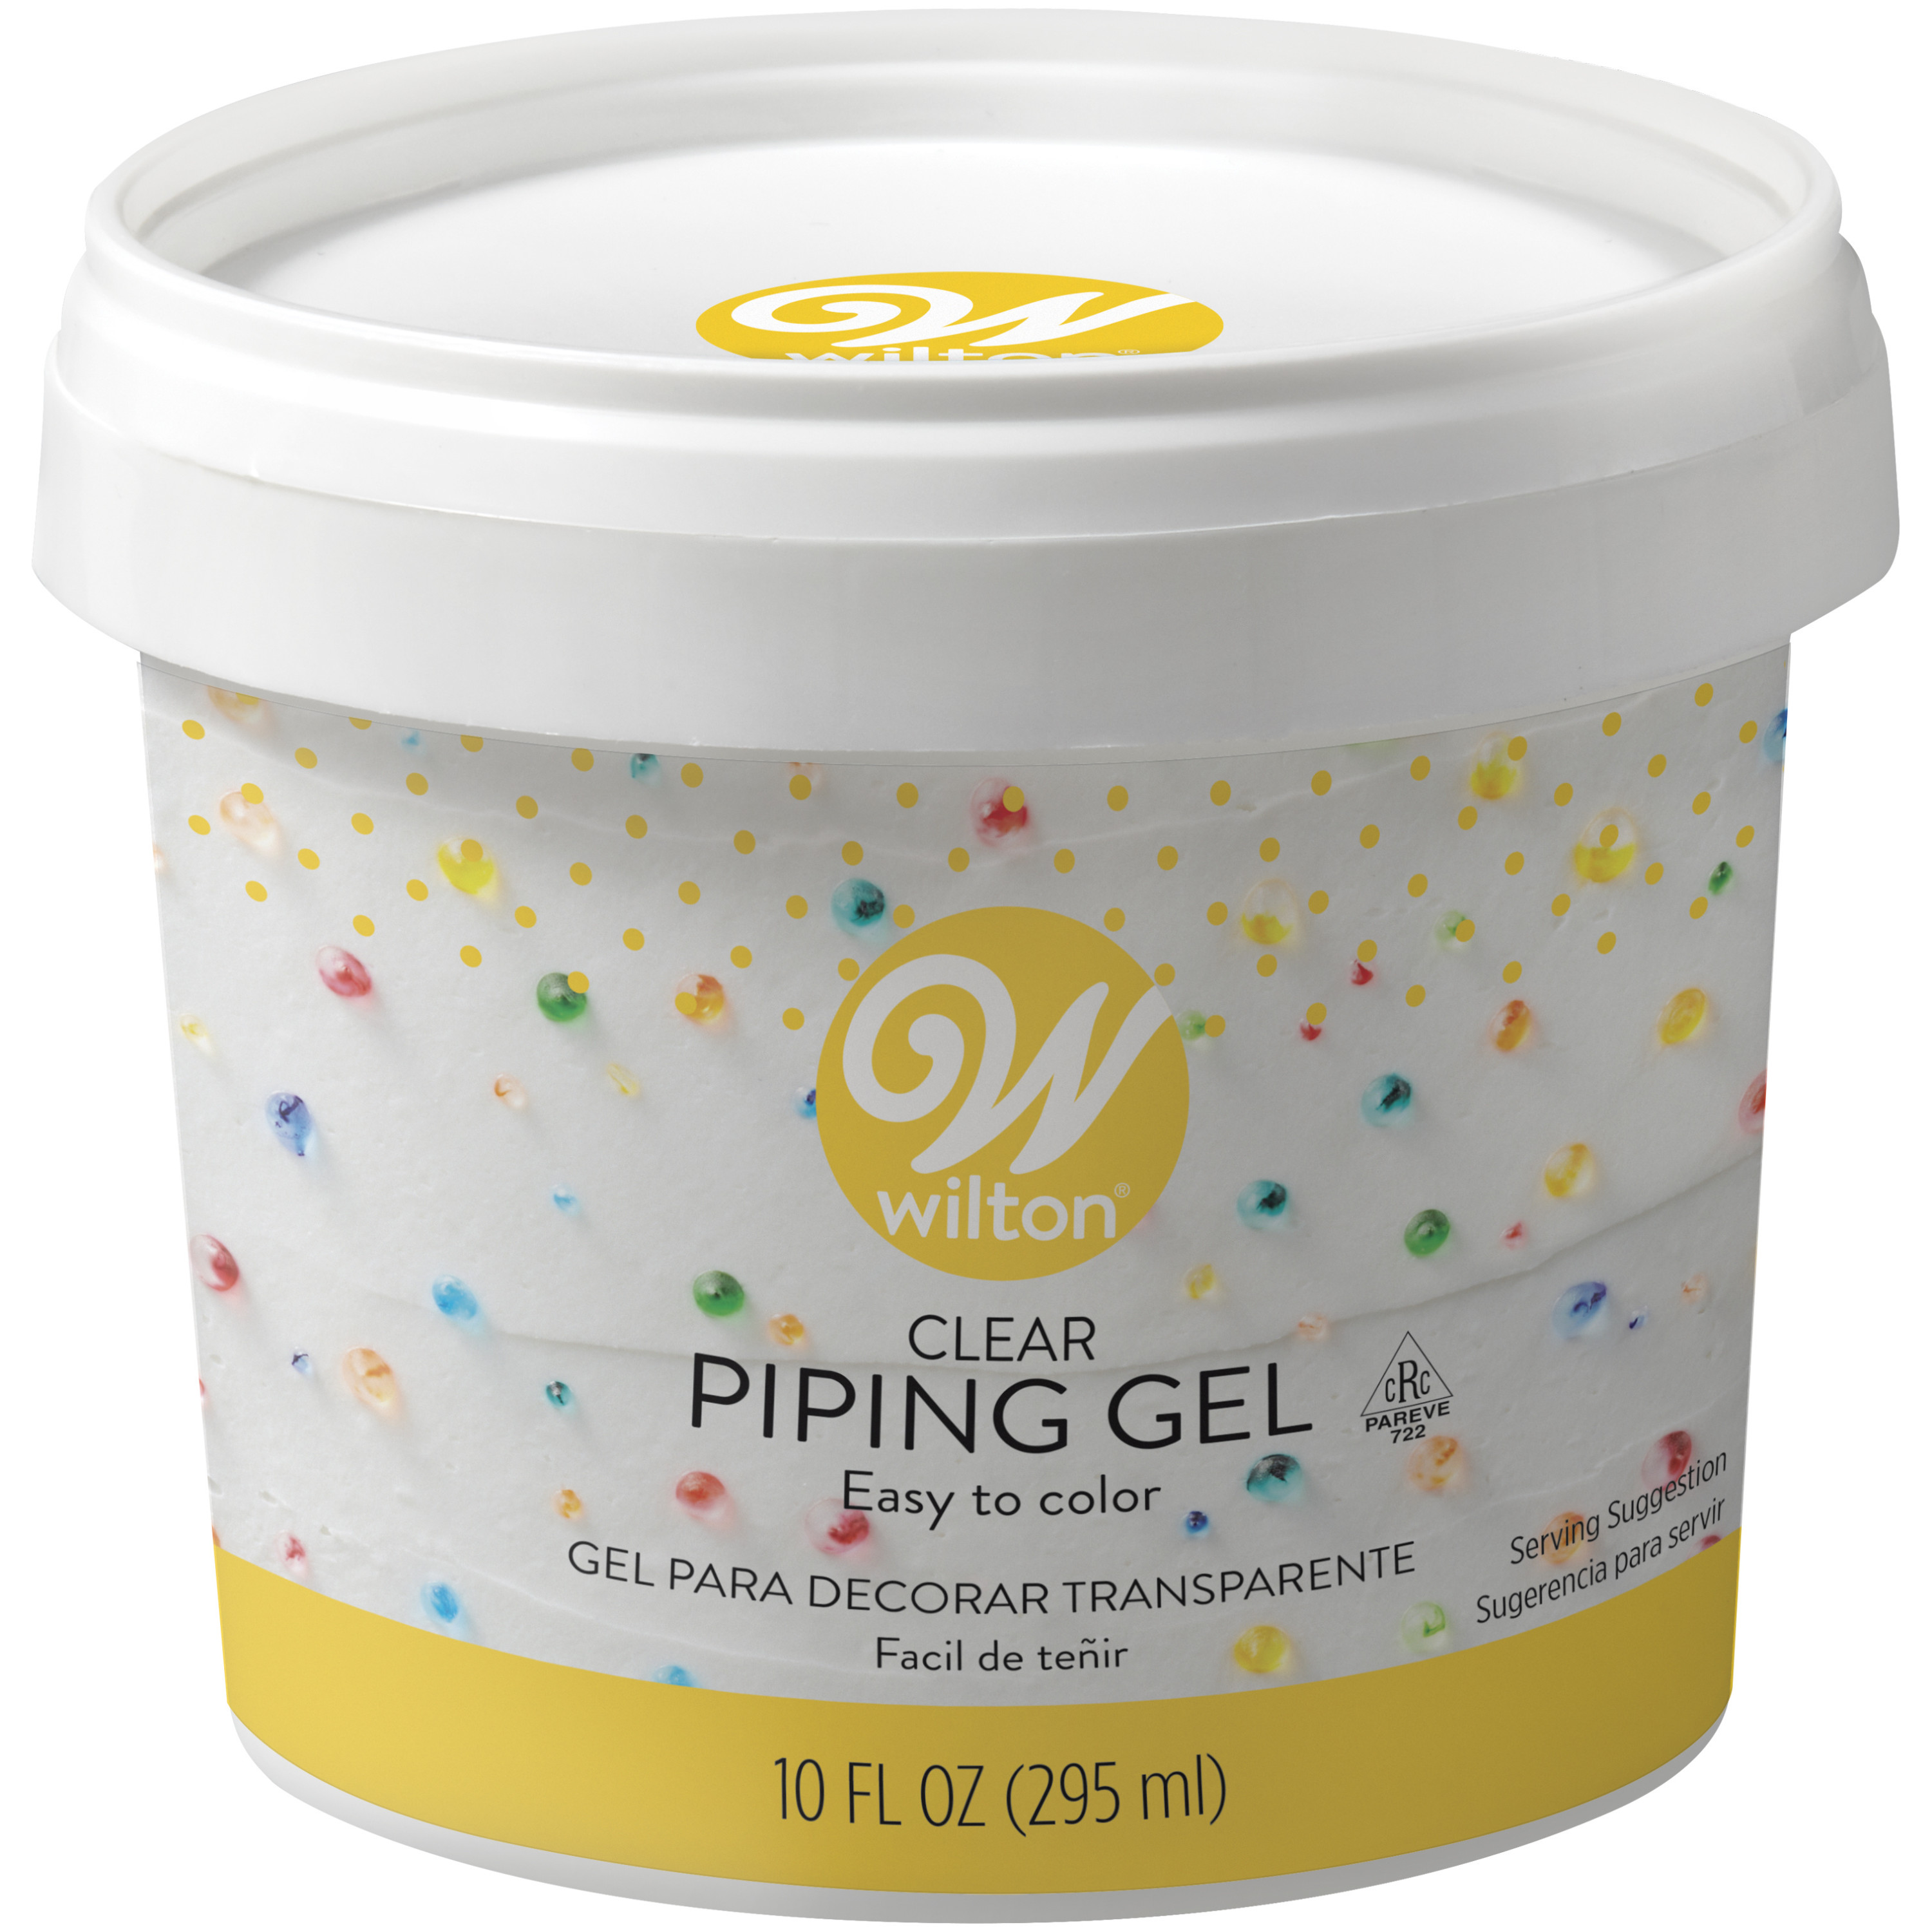 Wilton Clear Piping Gel, Edible Adhesive for Fondant and Gum Paste Decorations, 10 oz., Unflavored - image 1 of 5